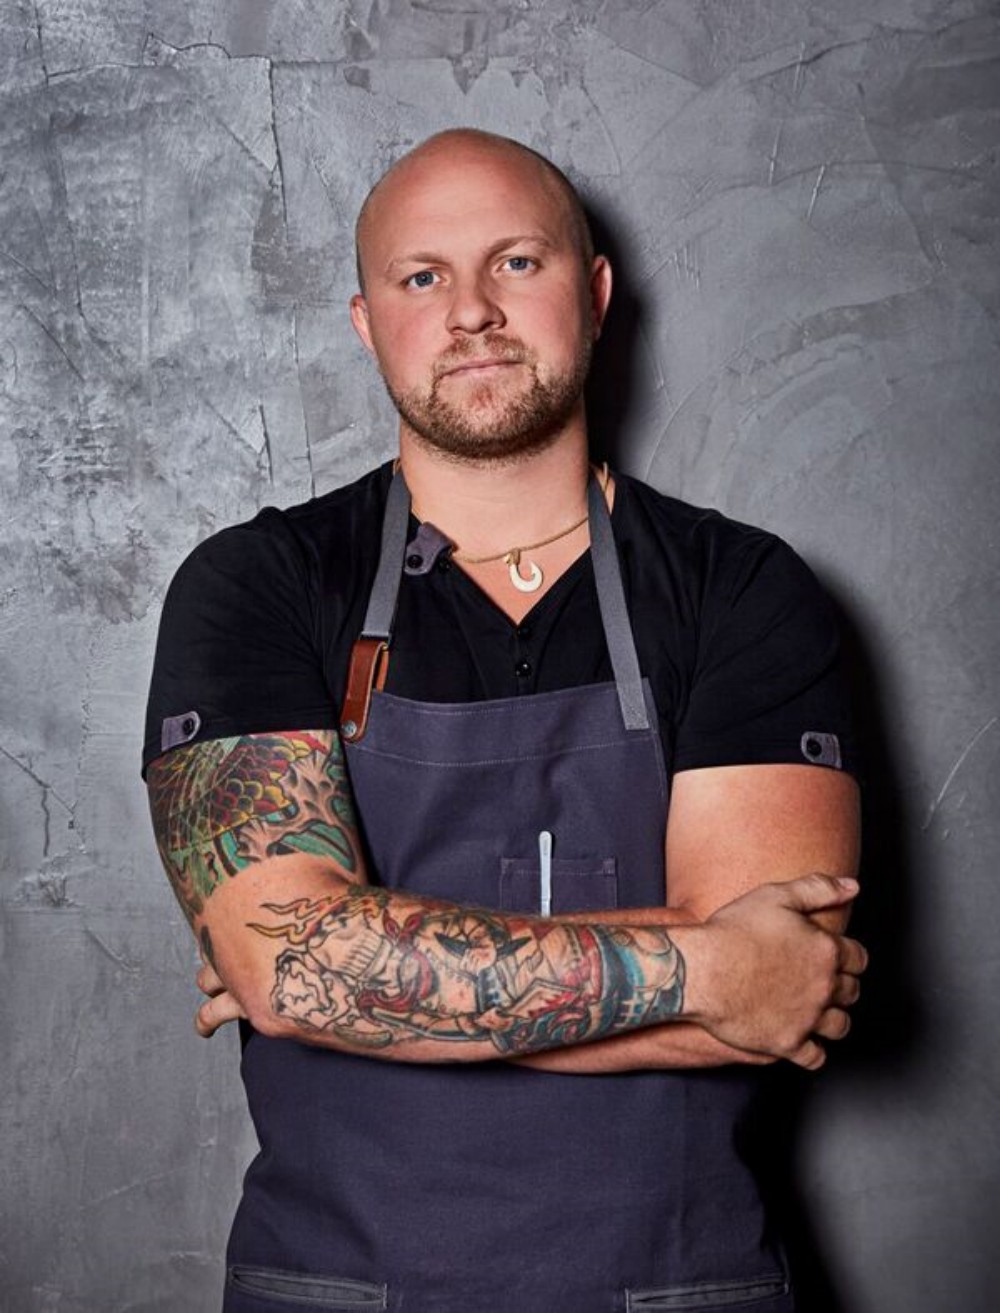 Top Chef Jeremy Ford / Top Chef Winner Jeremy Ford On Opening His Laid